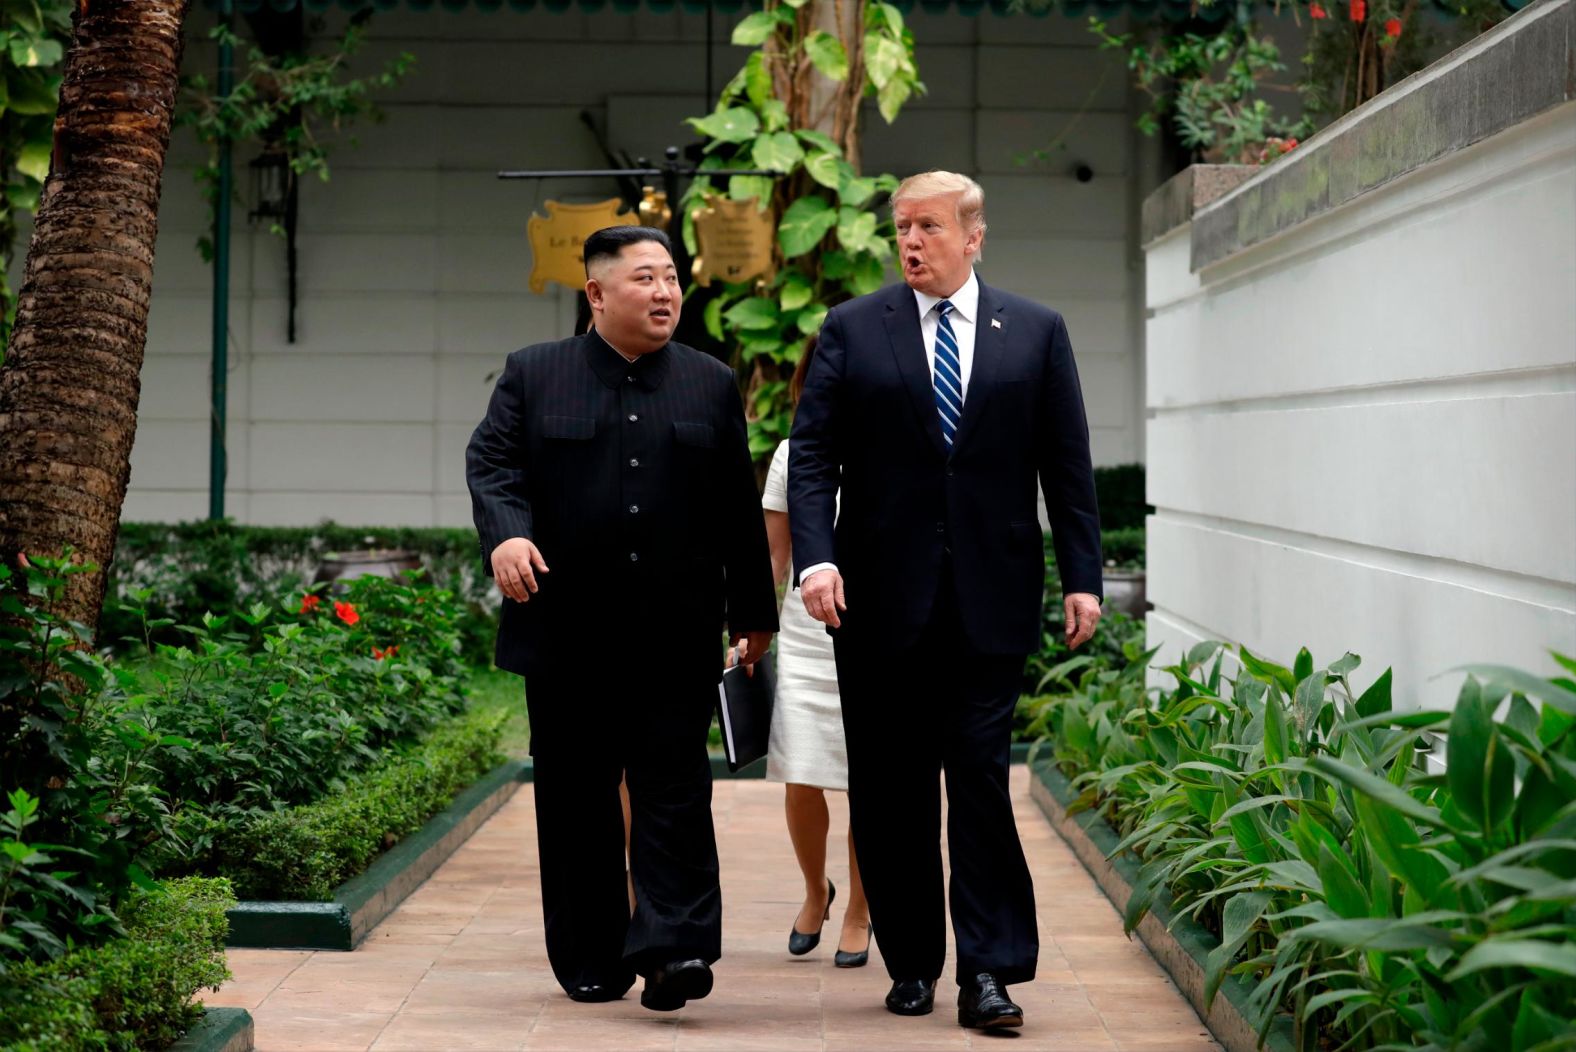 Kim and Trump take a walk outside the Hotel Metropole on February 28. <a href="index.php?page=&url=https%3A%2F%2Fwww.cnn.com%2Fpolitics%2Flive-news%2Ftrump-kim-jong-un-summit-vietnam-february-2019%2Fh_22700ef4fad83bba147f714d6317693d" target="_blank">They were due to have a friendly chat beside the hotel's pool,</a> but the humid conditions reportedly forced a change in plans and the two moved inside.